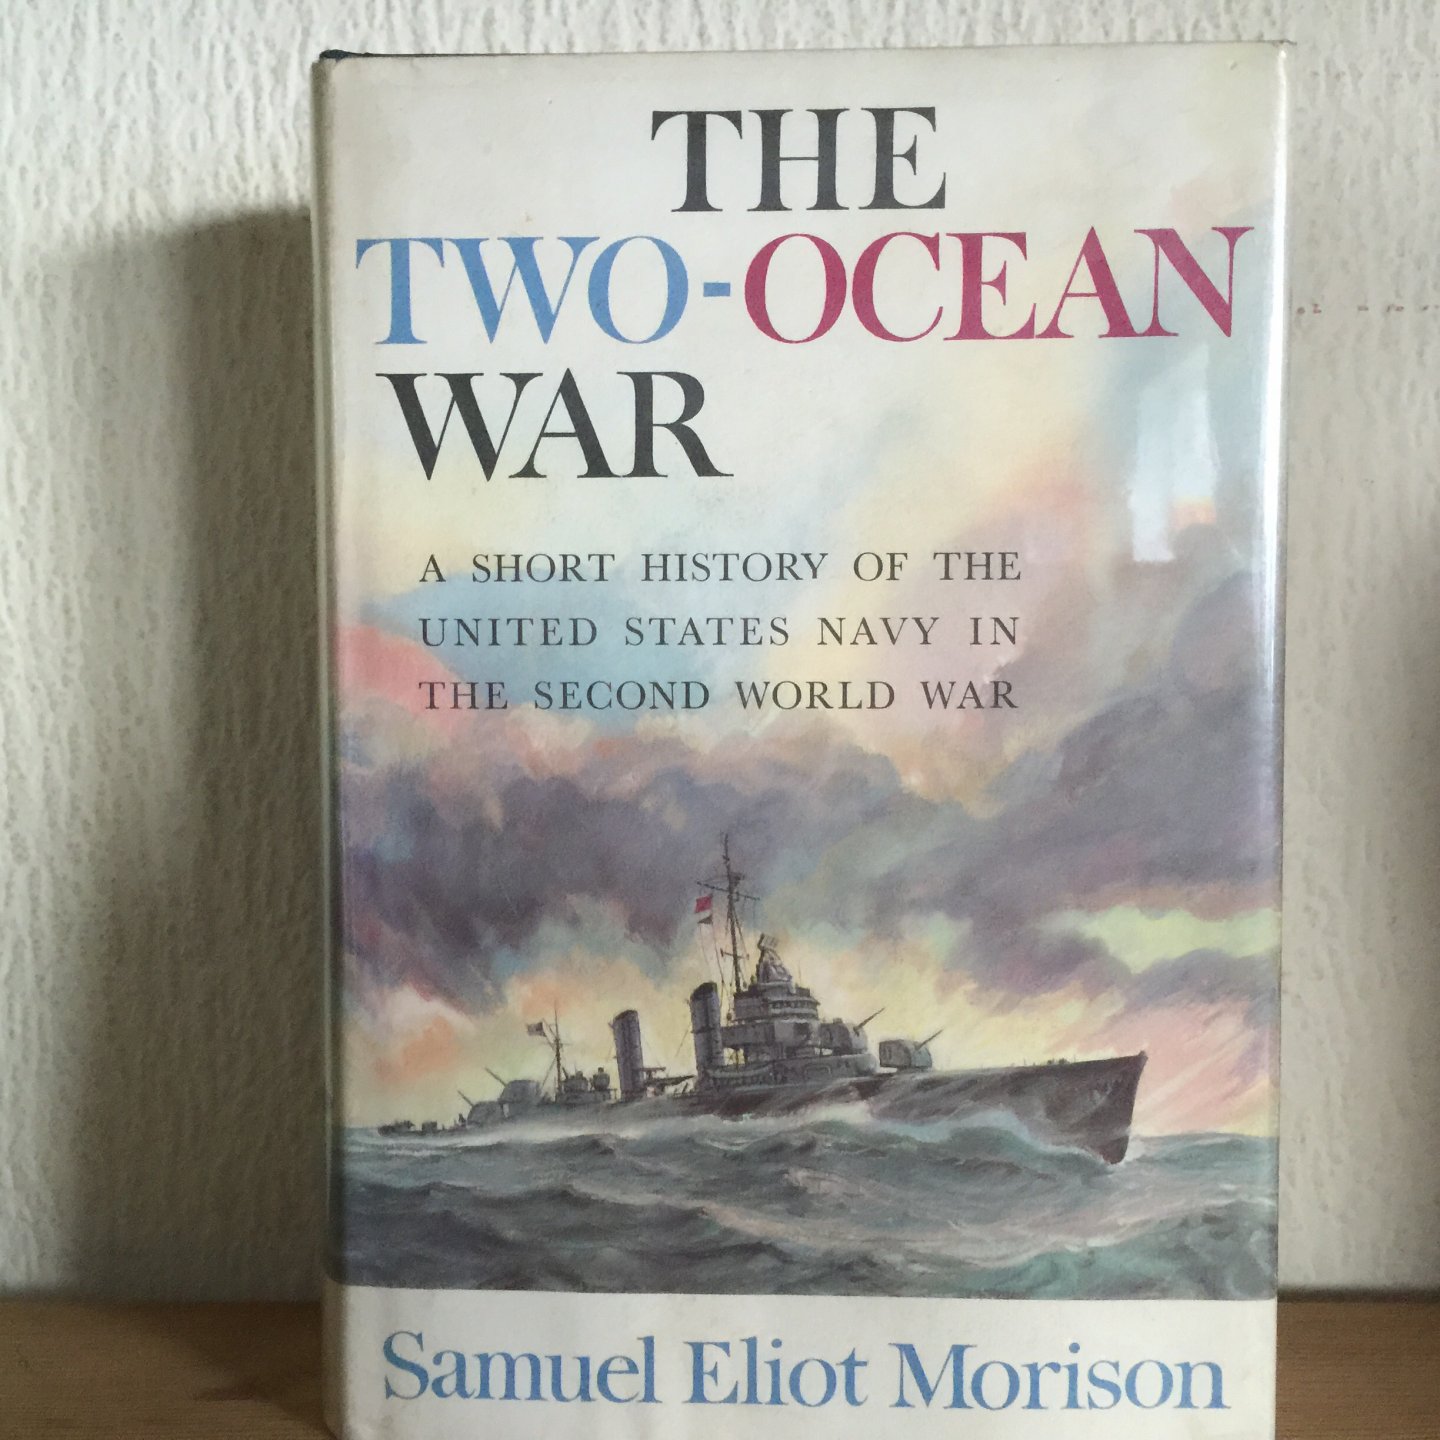 Samuel Eliot Morison - The Two Ocean War, a short history of the United States Navy in Second World War